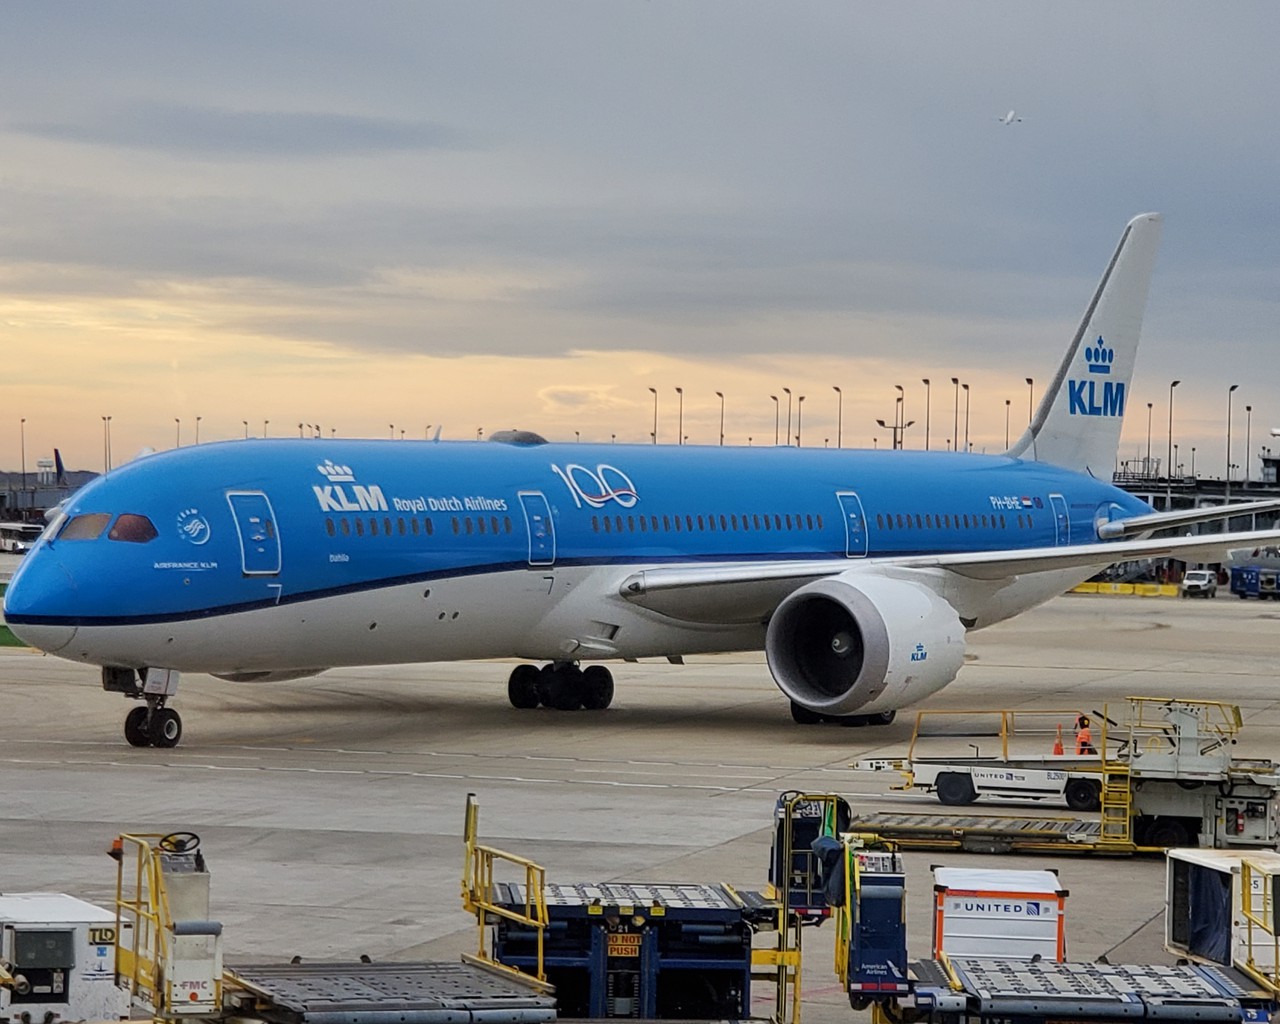 klm travel requirements to amsterdam